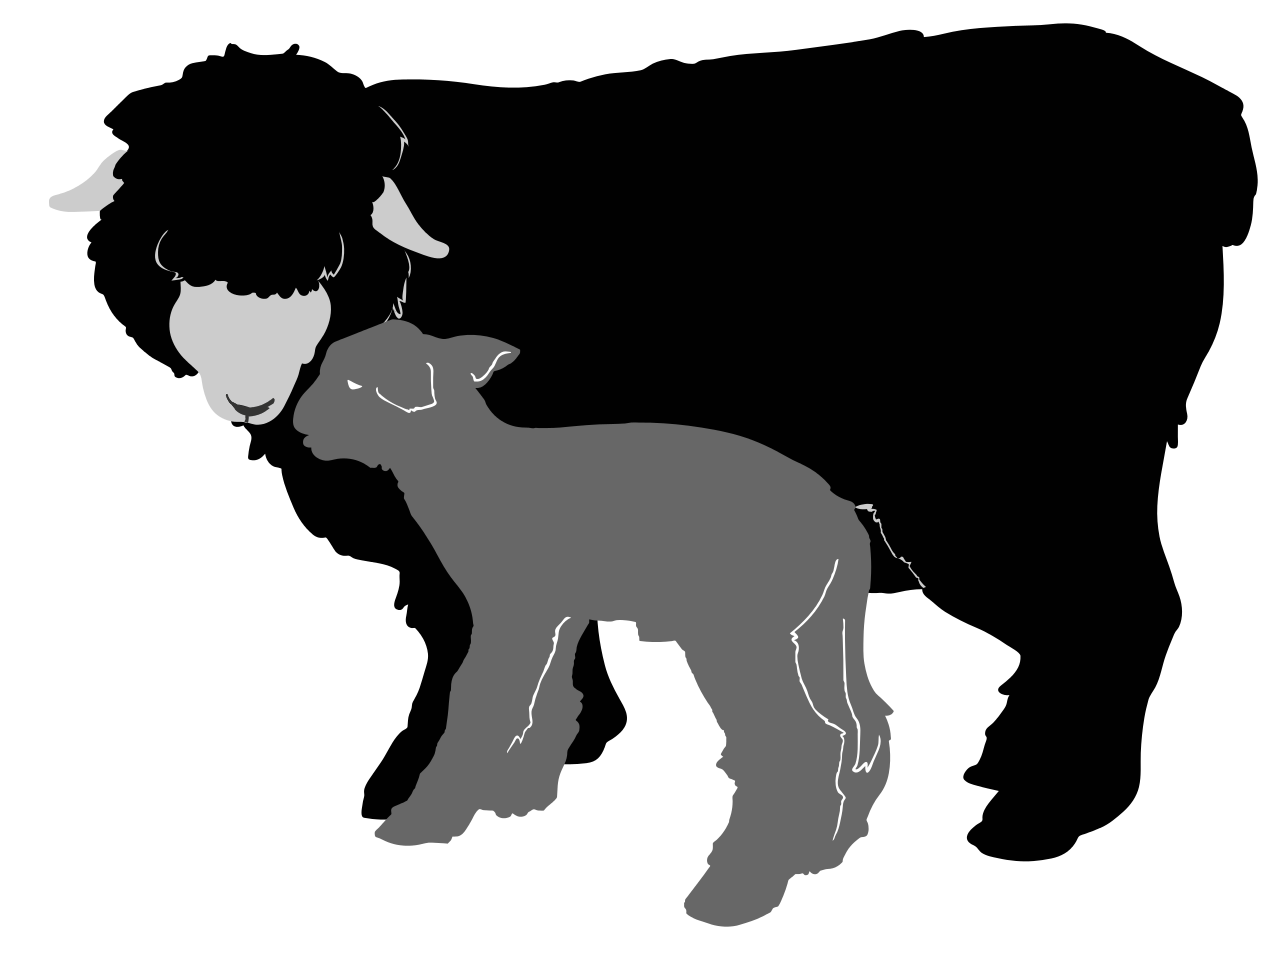 Clipart sheep silhouette. Clip art at getdrawings